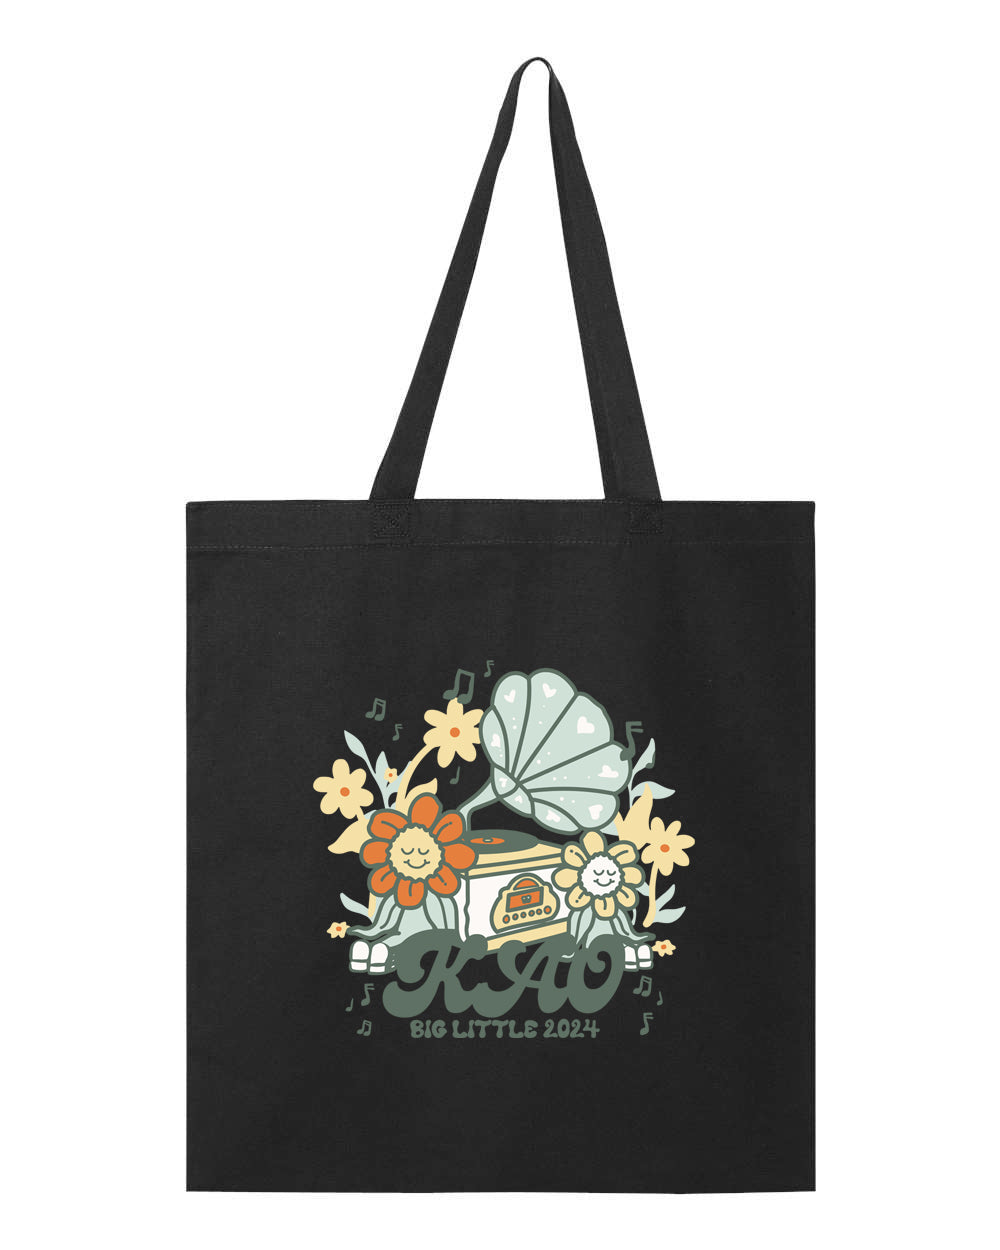 a black tote bag with an image of a baby carriage and flowers